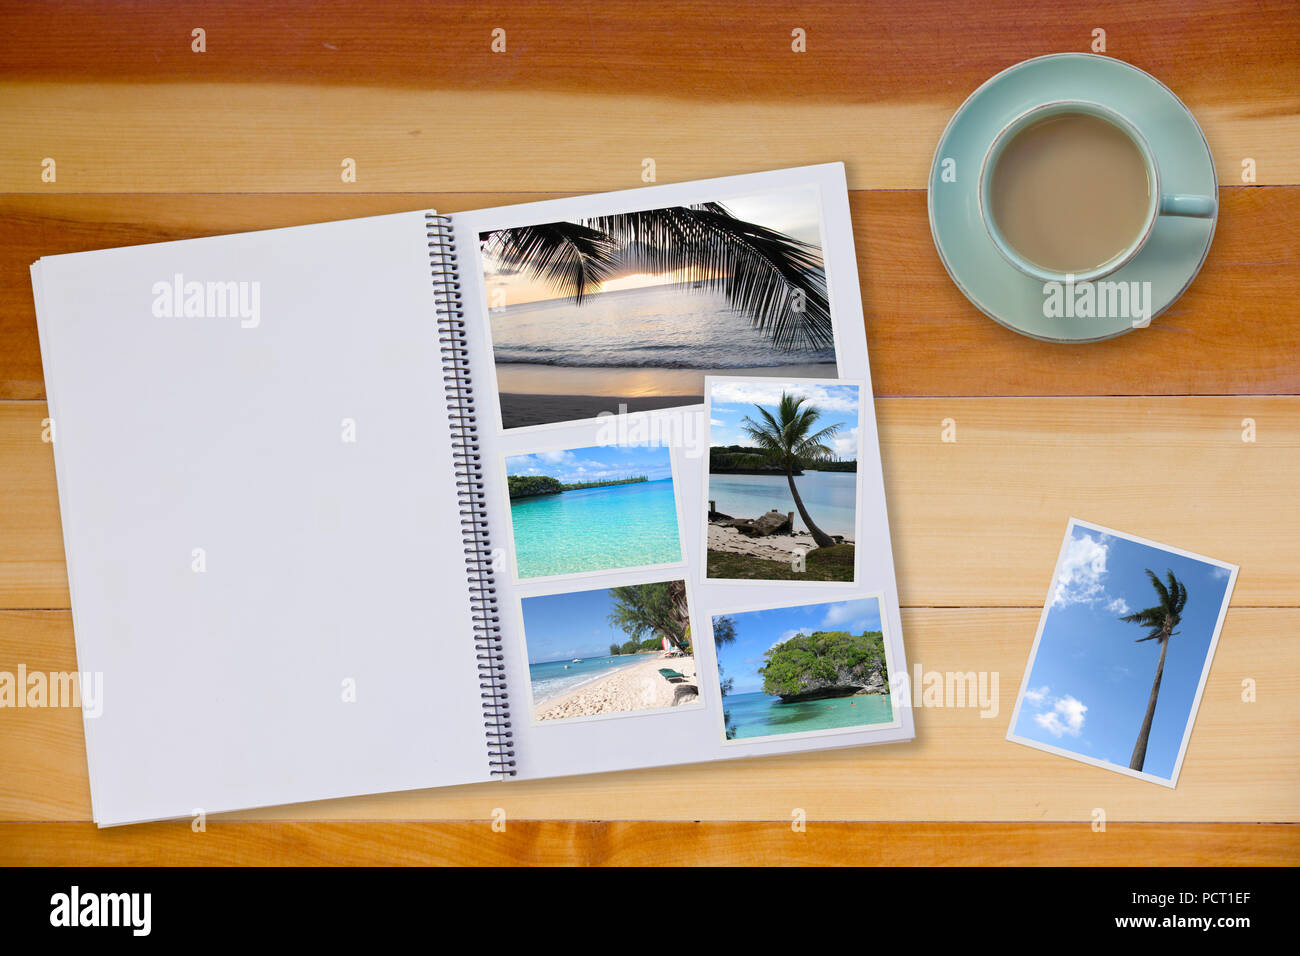 Photobook Album on Wooden Floor Table with Travel Photos of beaches and Coffee or Tea in Cup Stock Photo